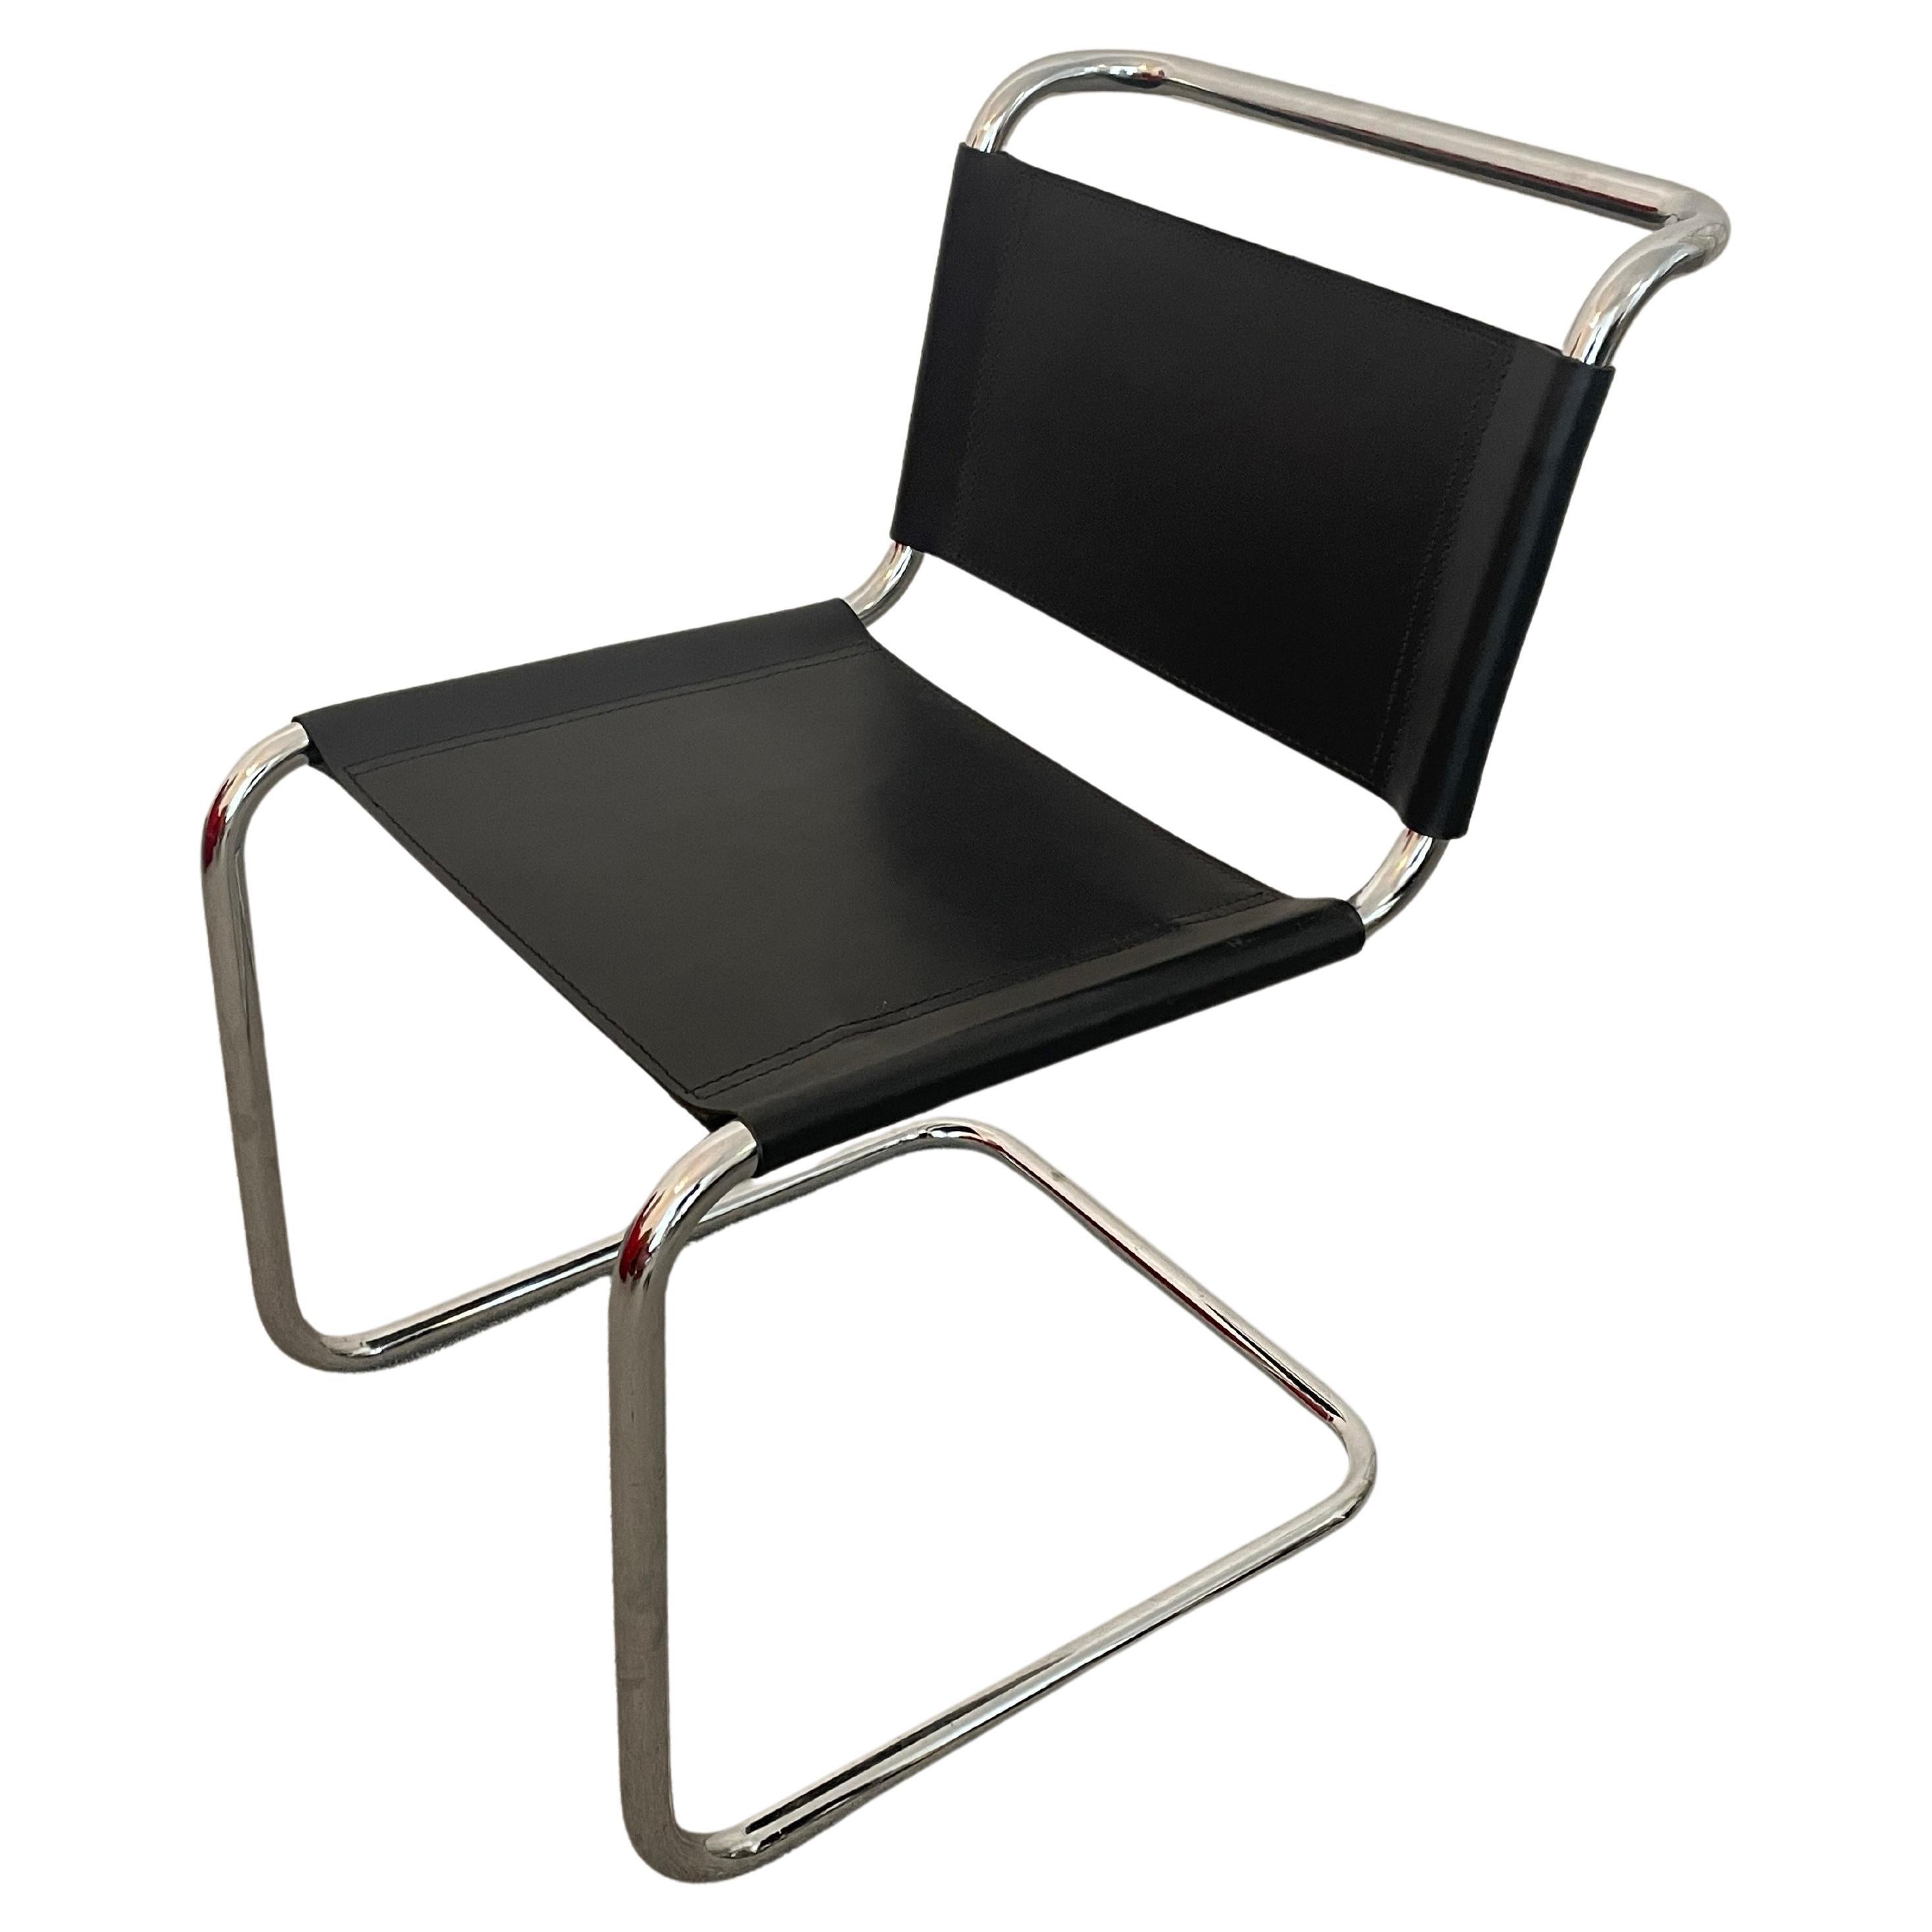 B33 Black Leather Cantilevered Chair by Marcel Breuer